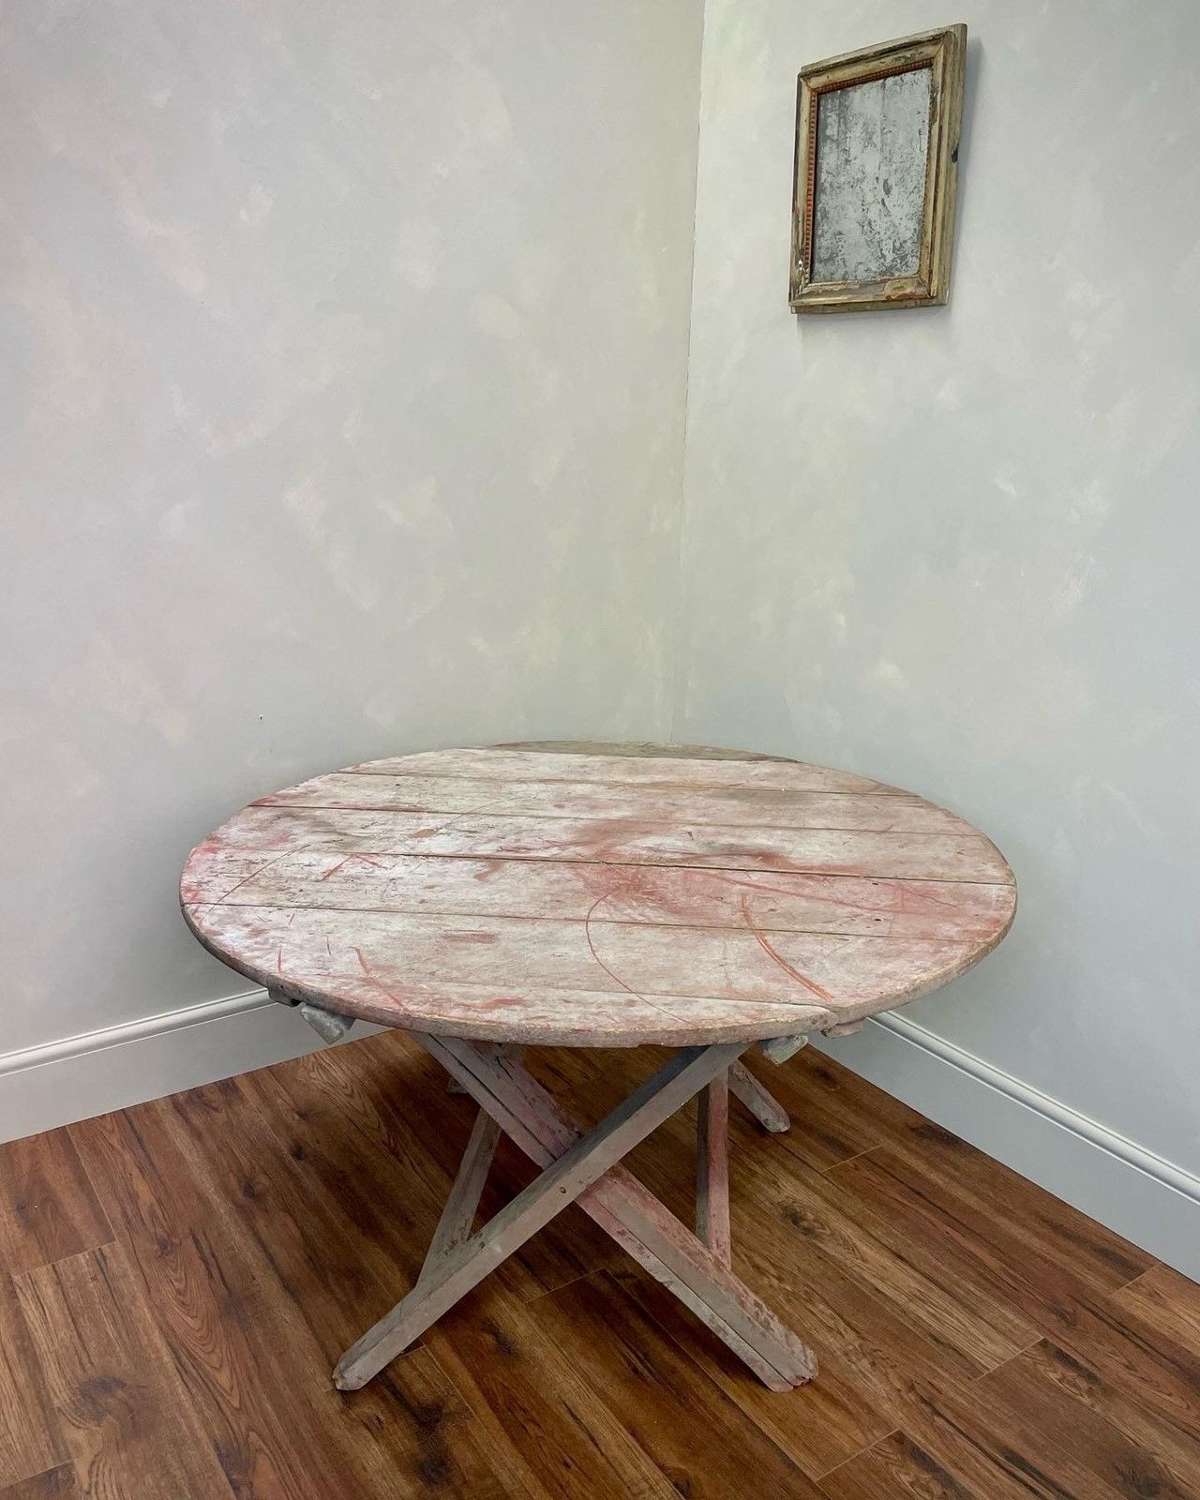 Rustic French pine table